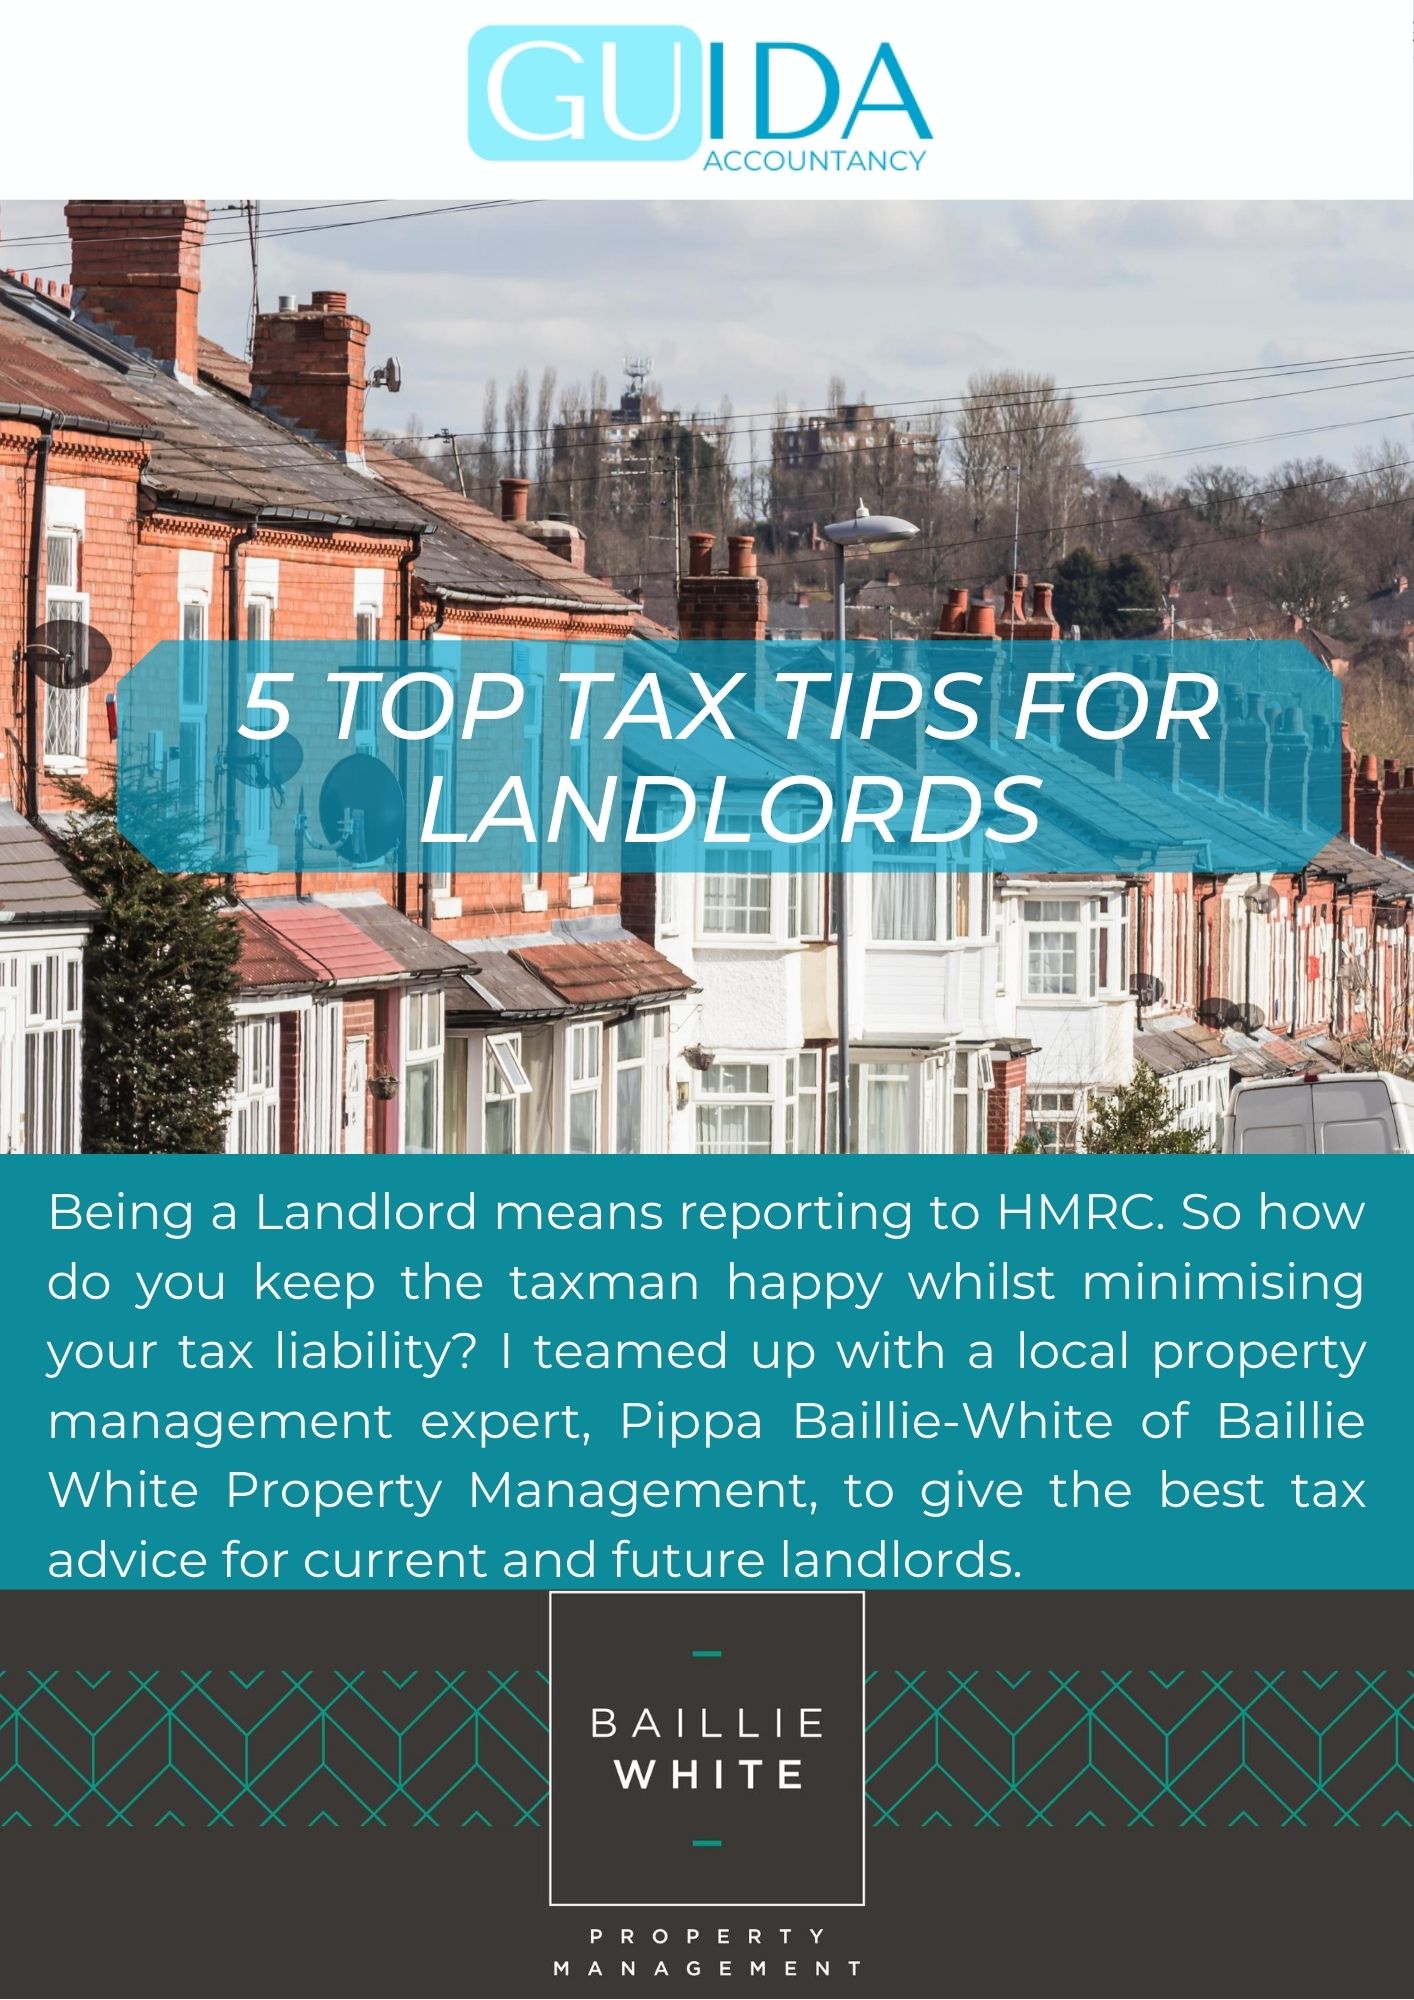 Top Tax Tips for Landlords